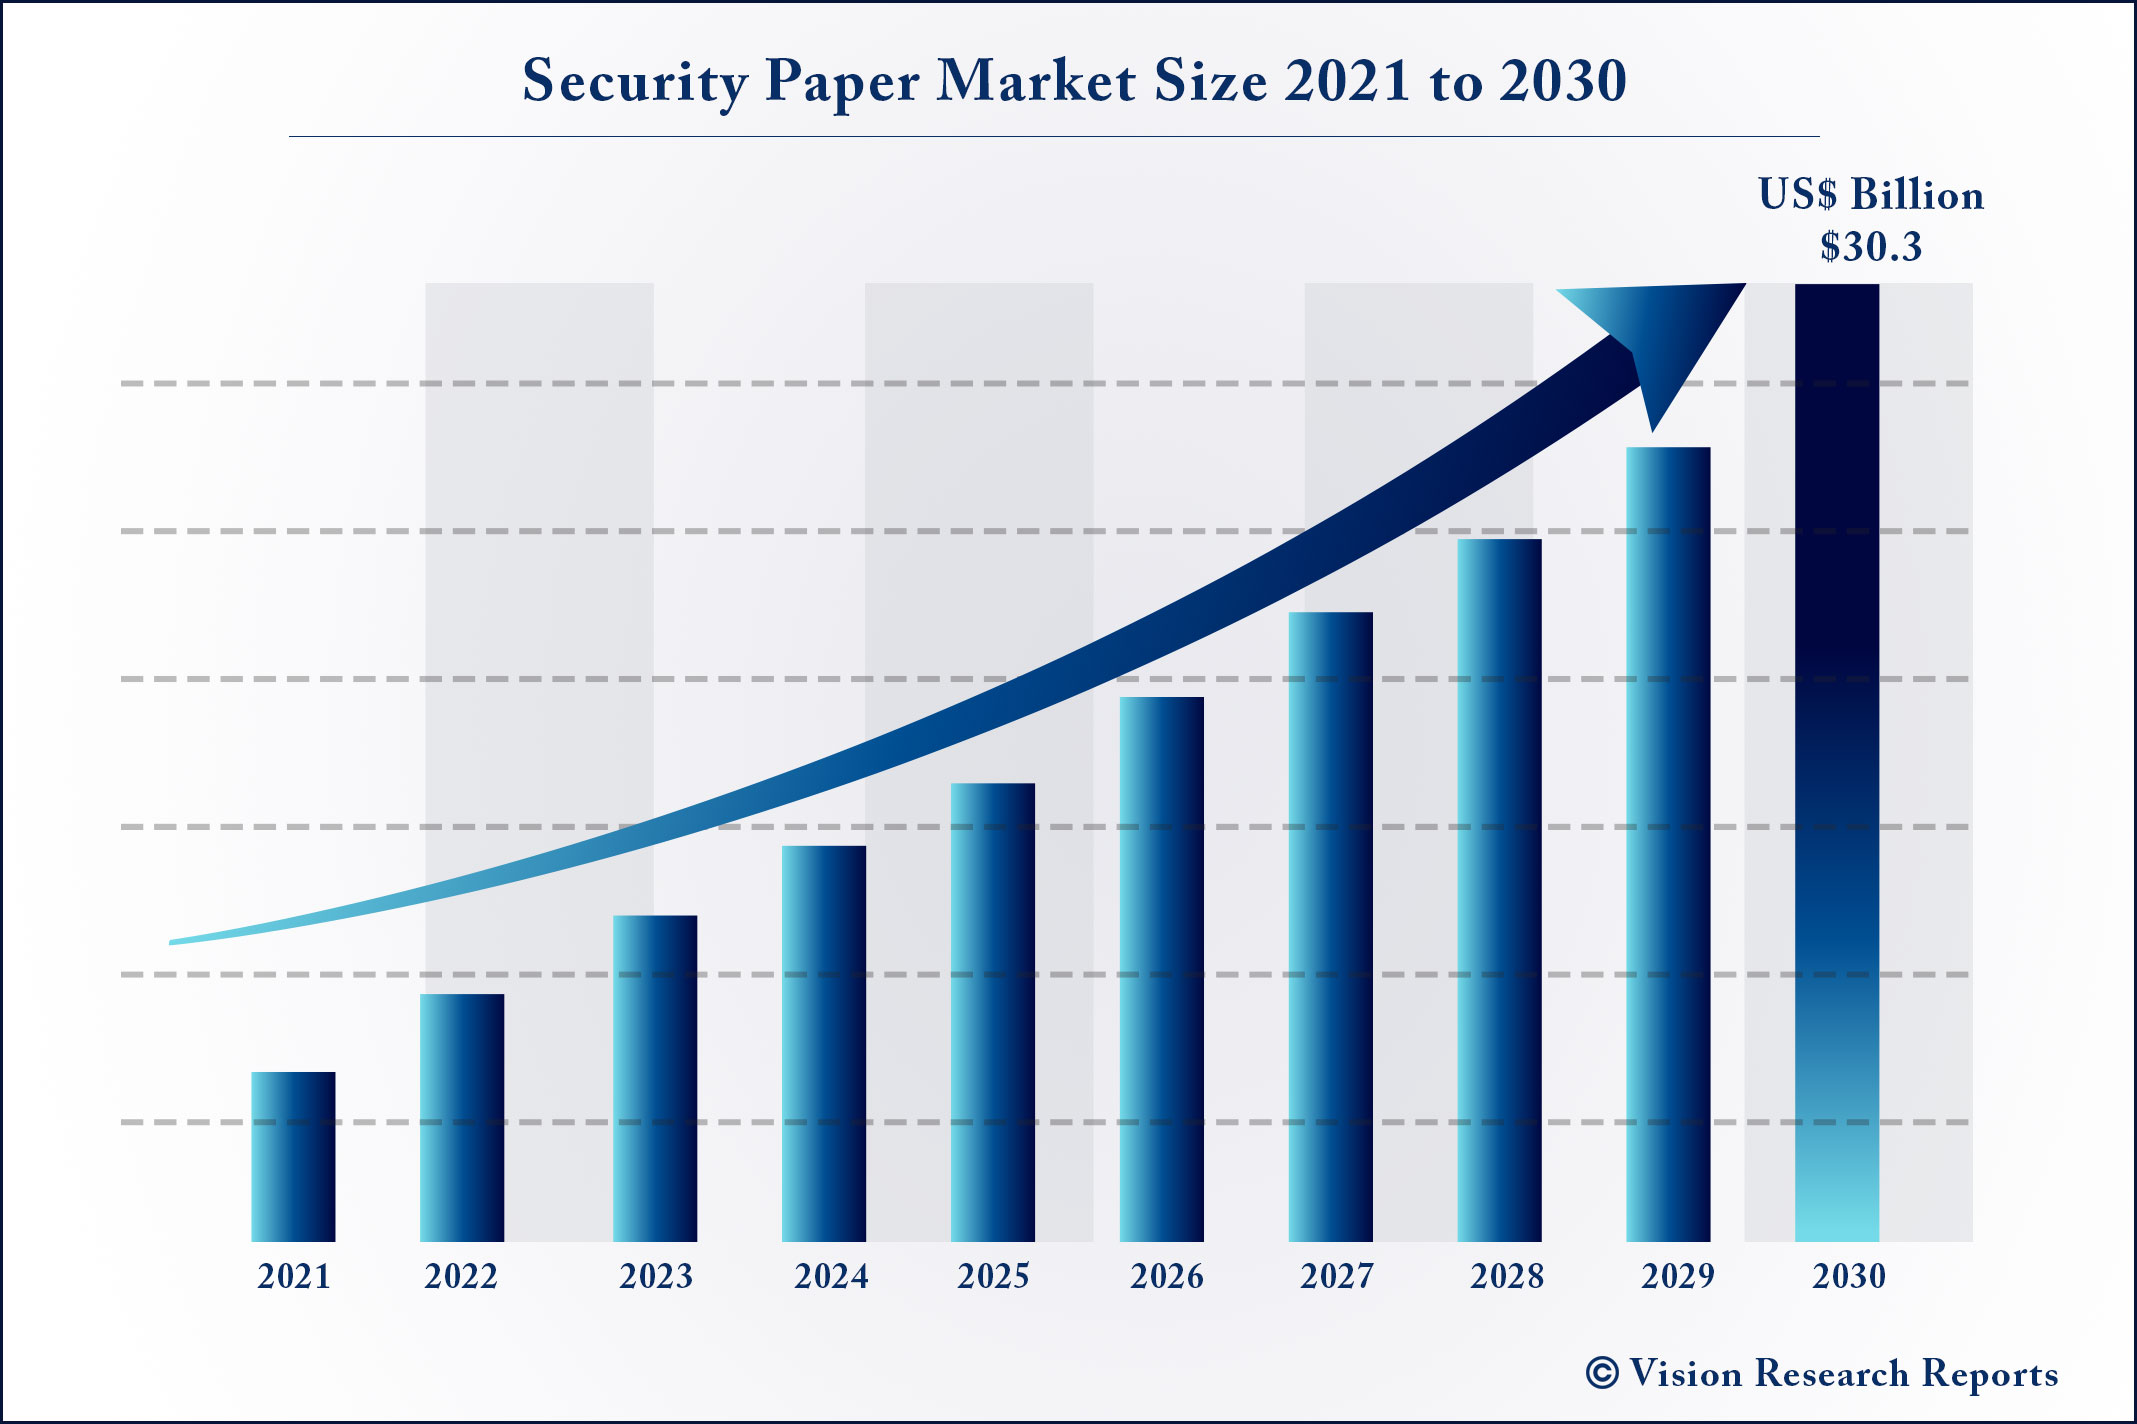 Security Paper Market Size 2021 to 2030